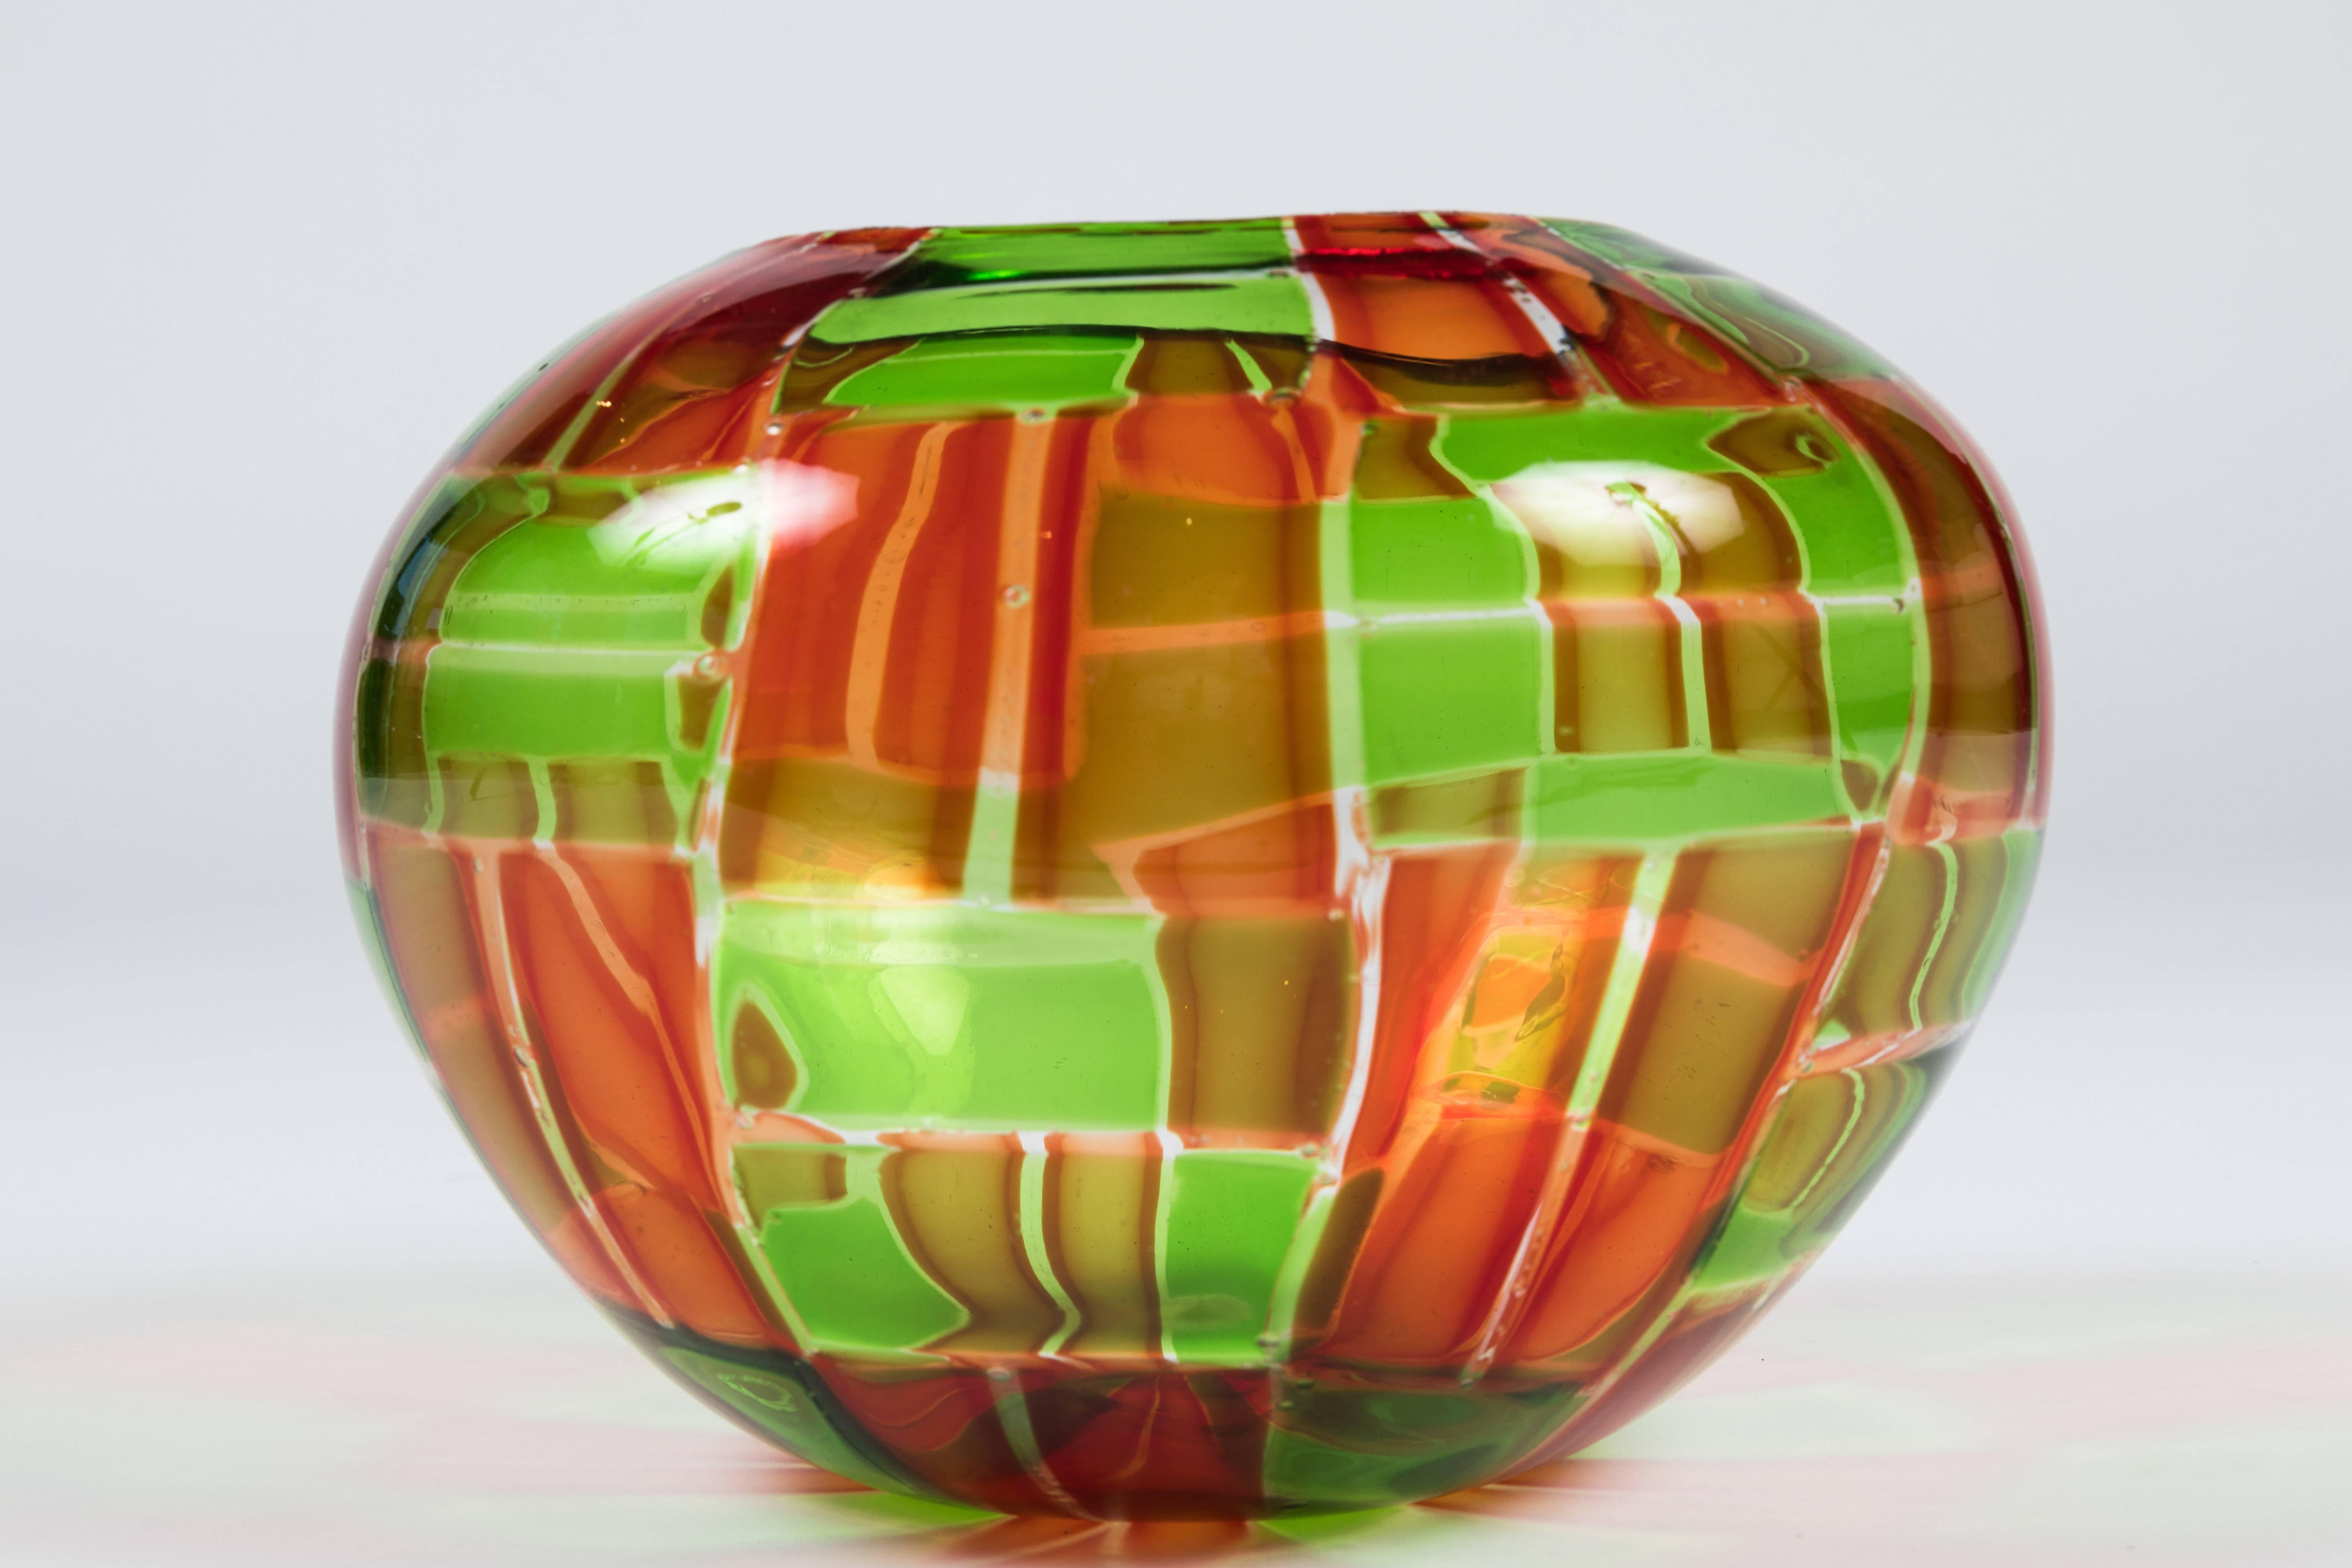 This beautiful Murano glass Art Deco style bowl was designed by Gianni Toso. The Toso family has a 700-year uninterrupted tradition of Murano glass blowing, creating glass vessels that became the jealously guarded treasures of Venetian aristocracy.